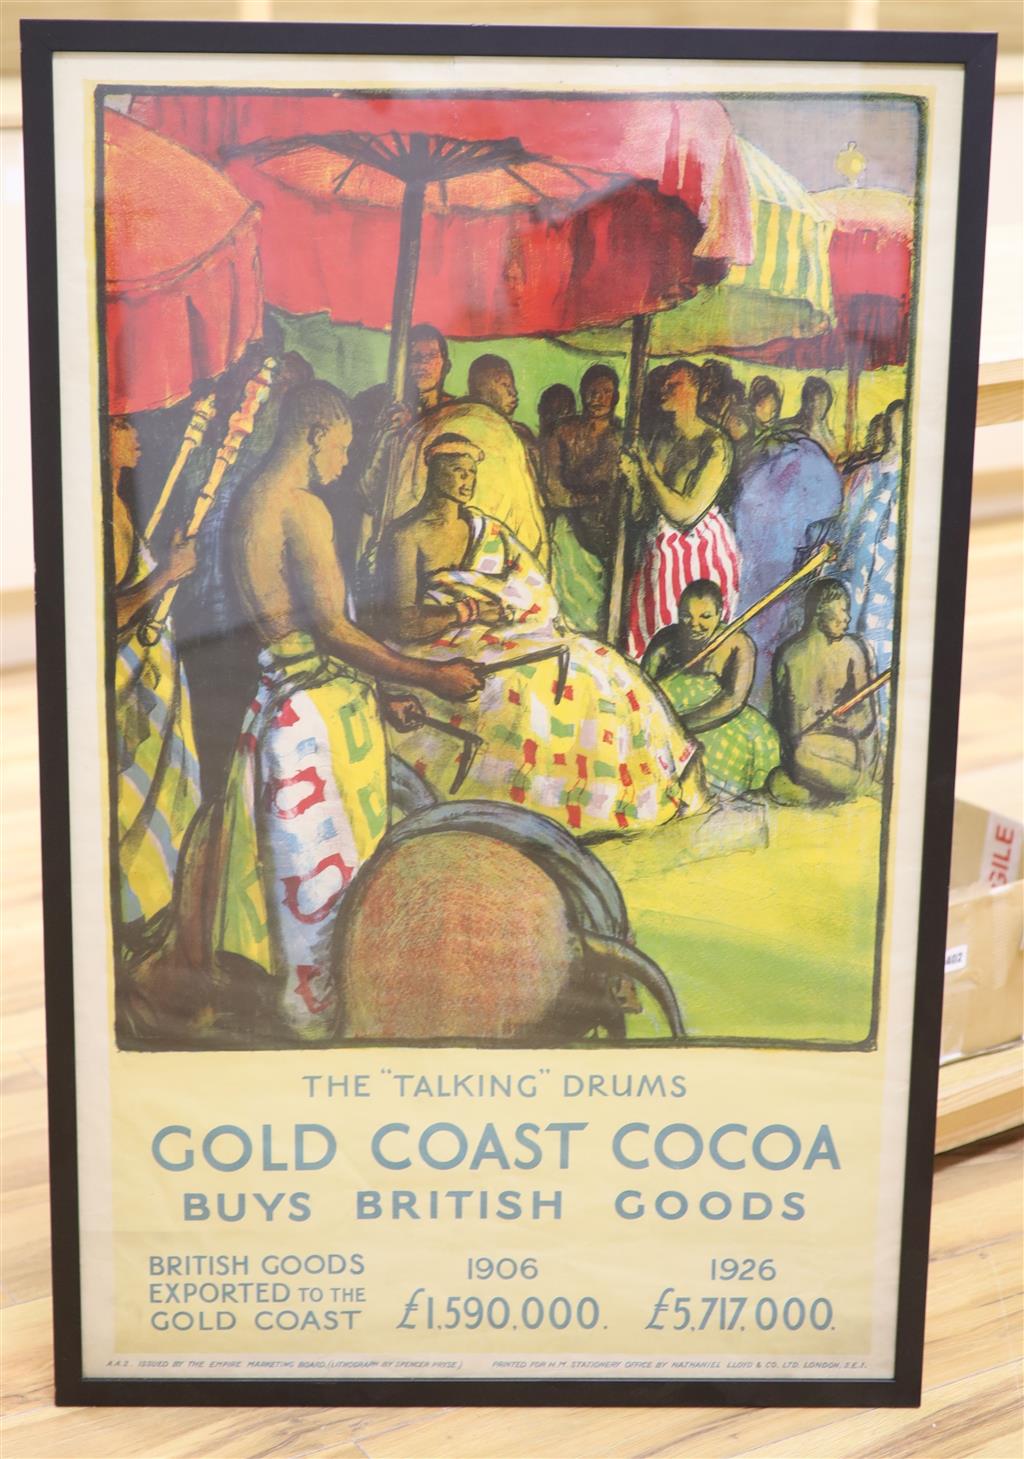 Spencer Pryse, lithographic poster, The Talking Drums, Gold Coast Coco Buys British Bonds, 102 x 64cm